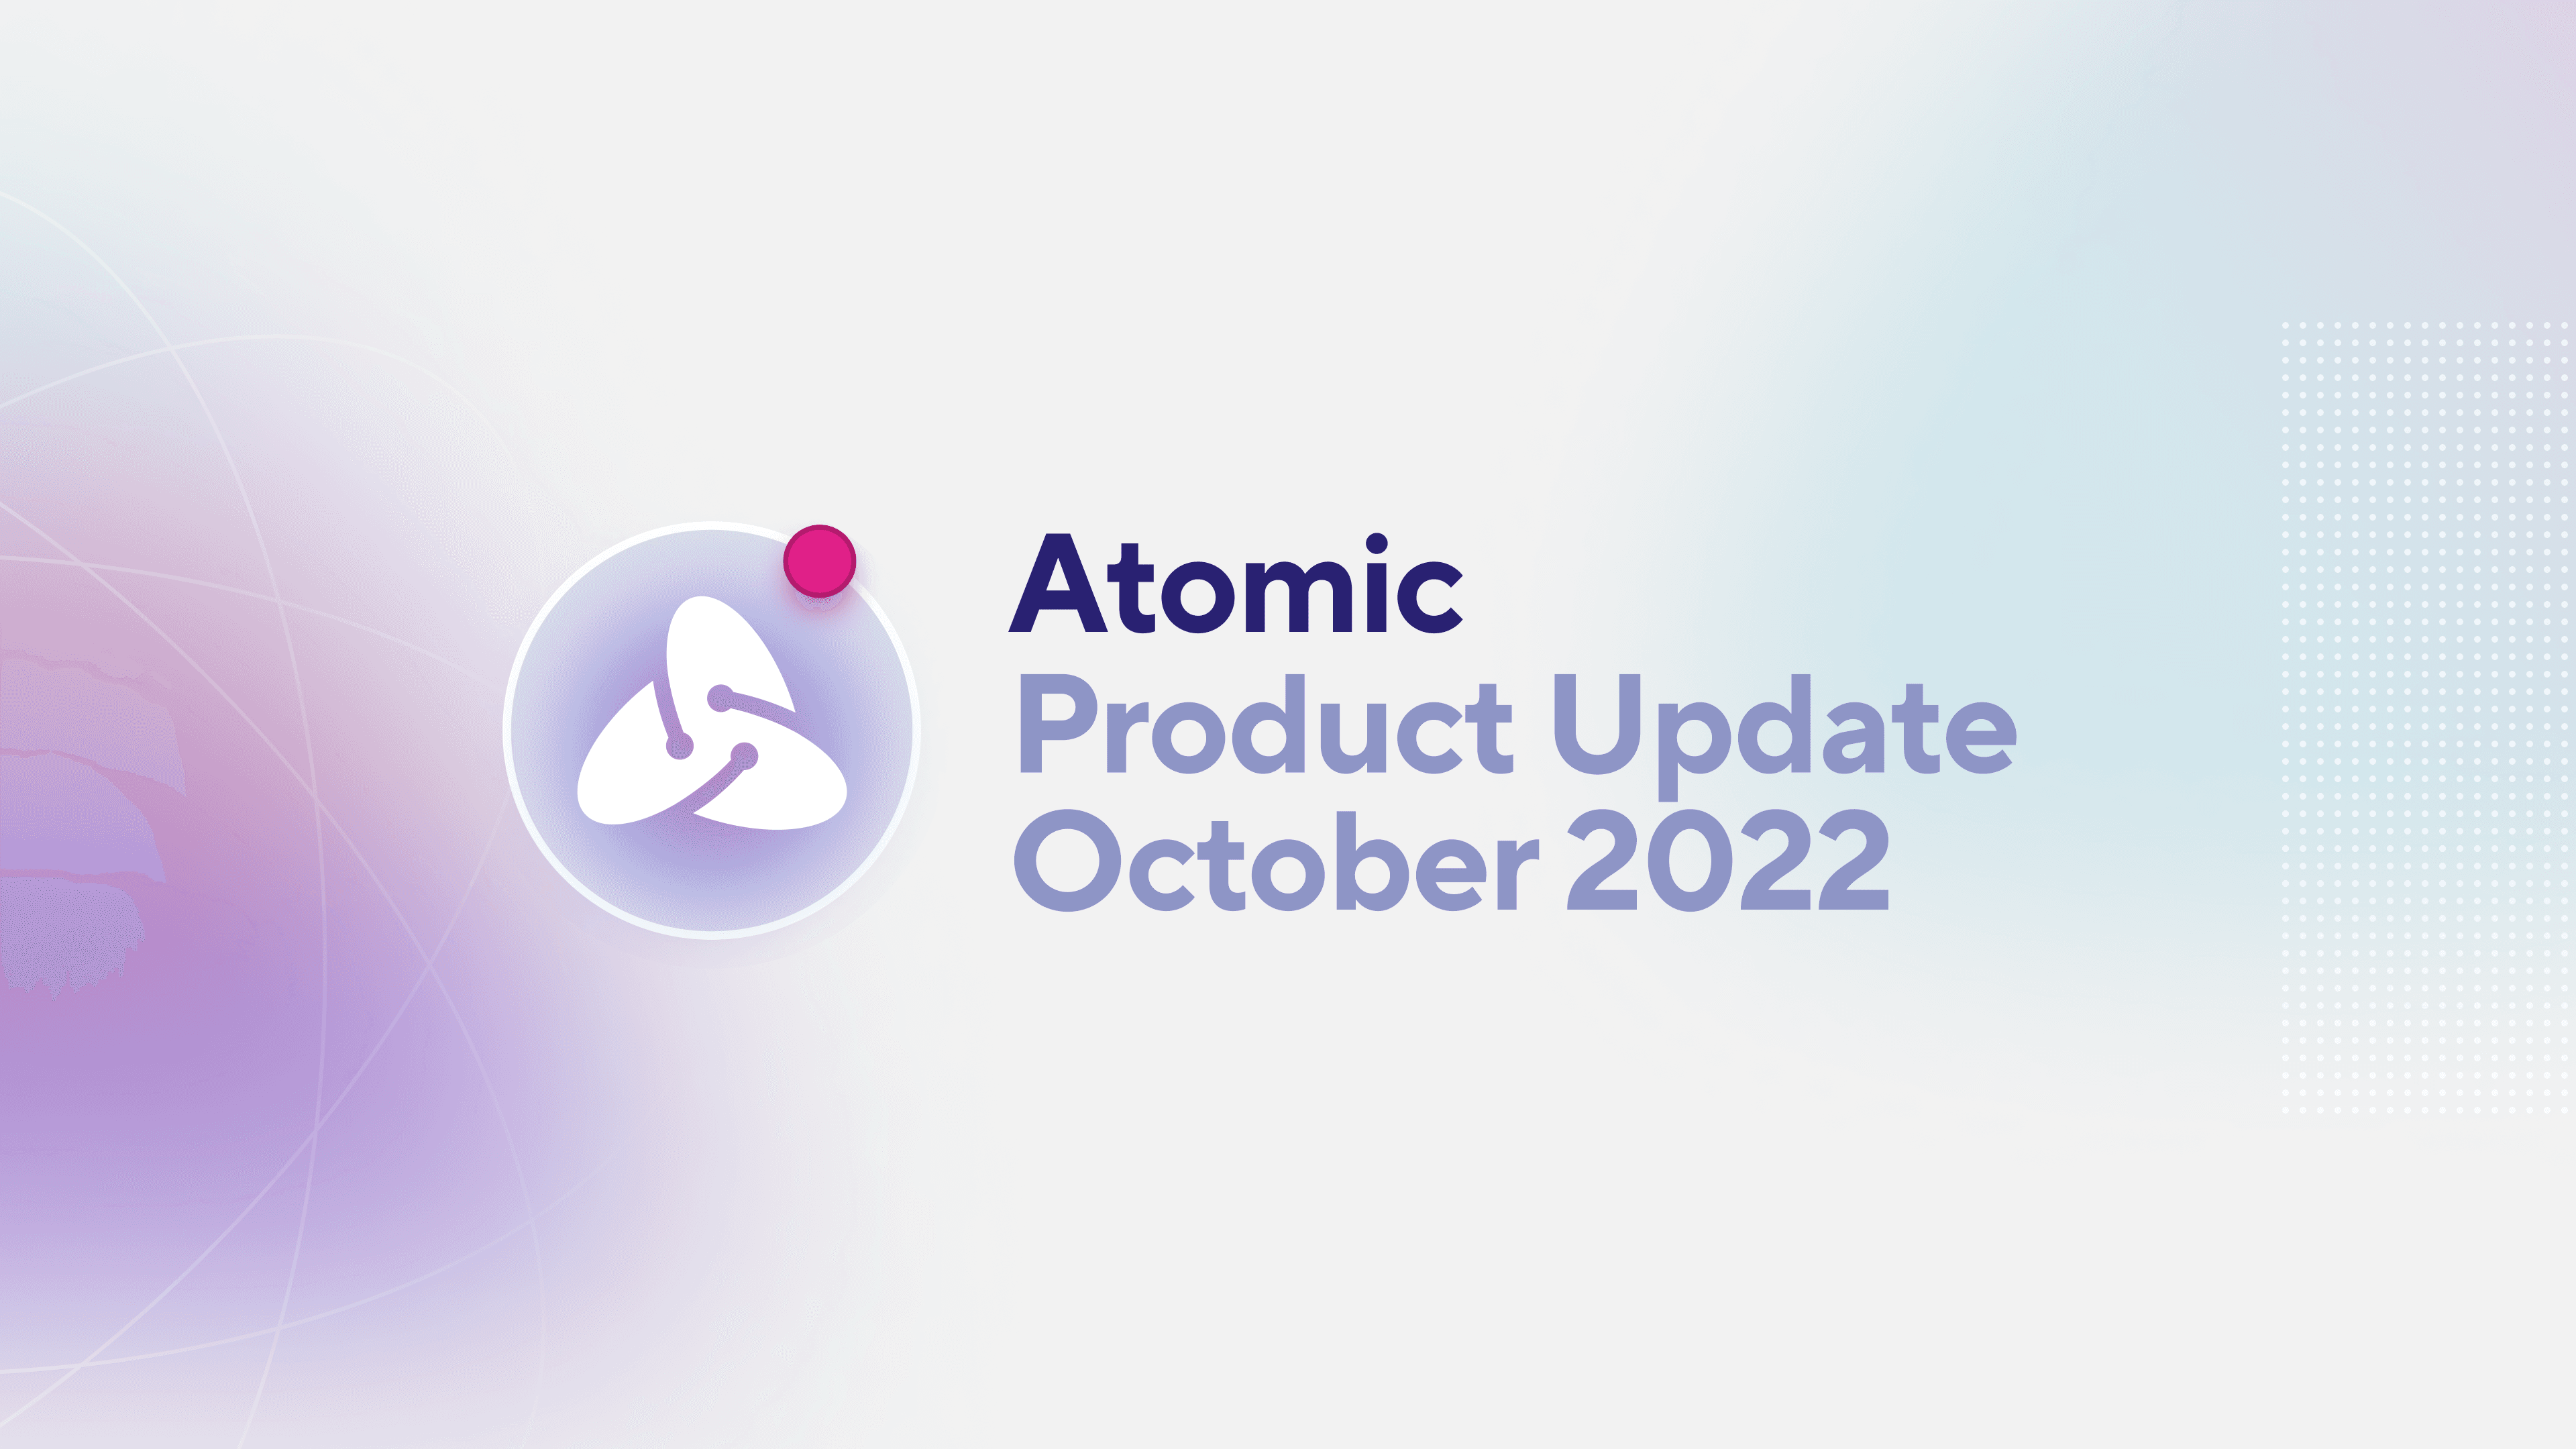 Atomic Product Update October 2022